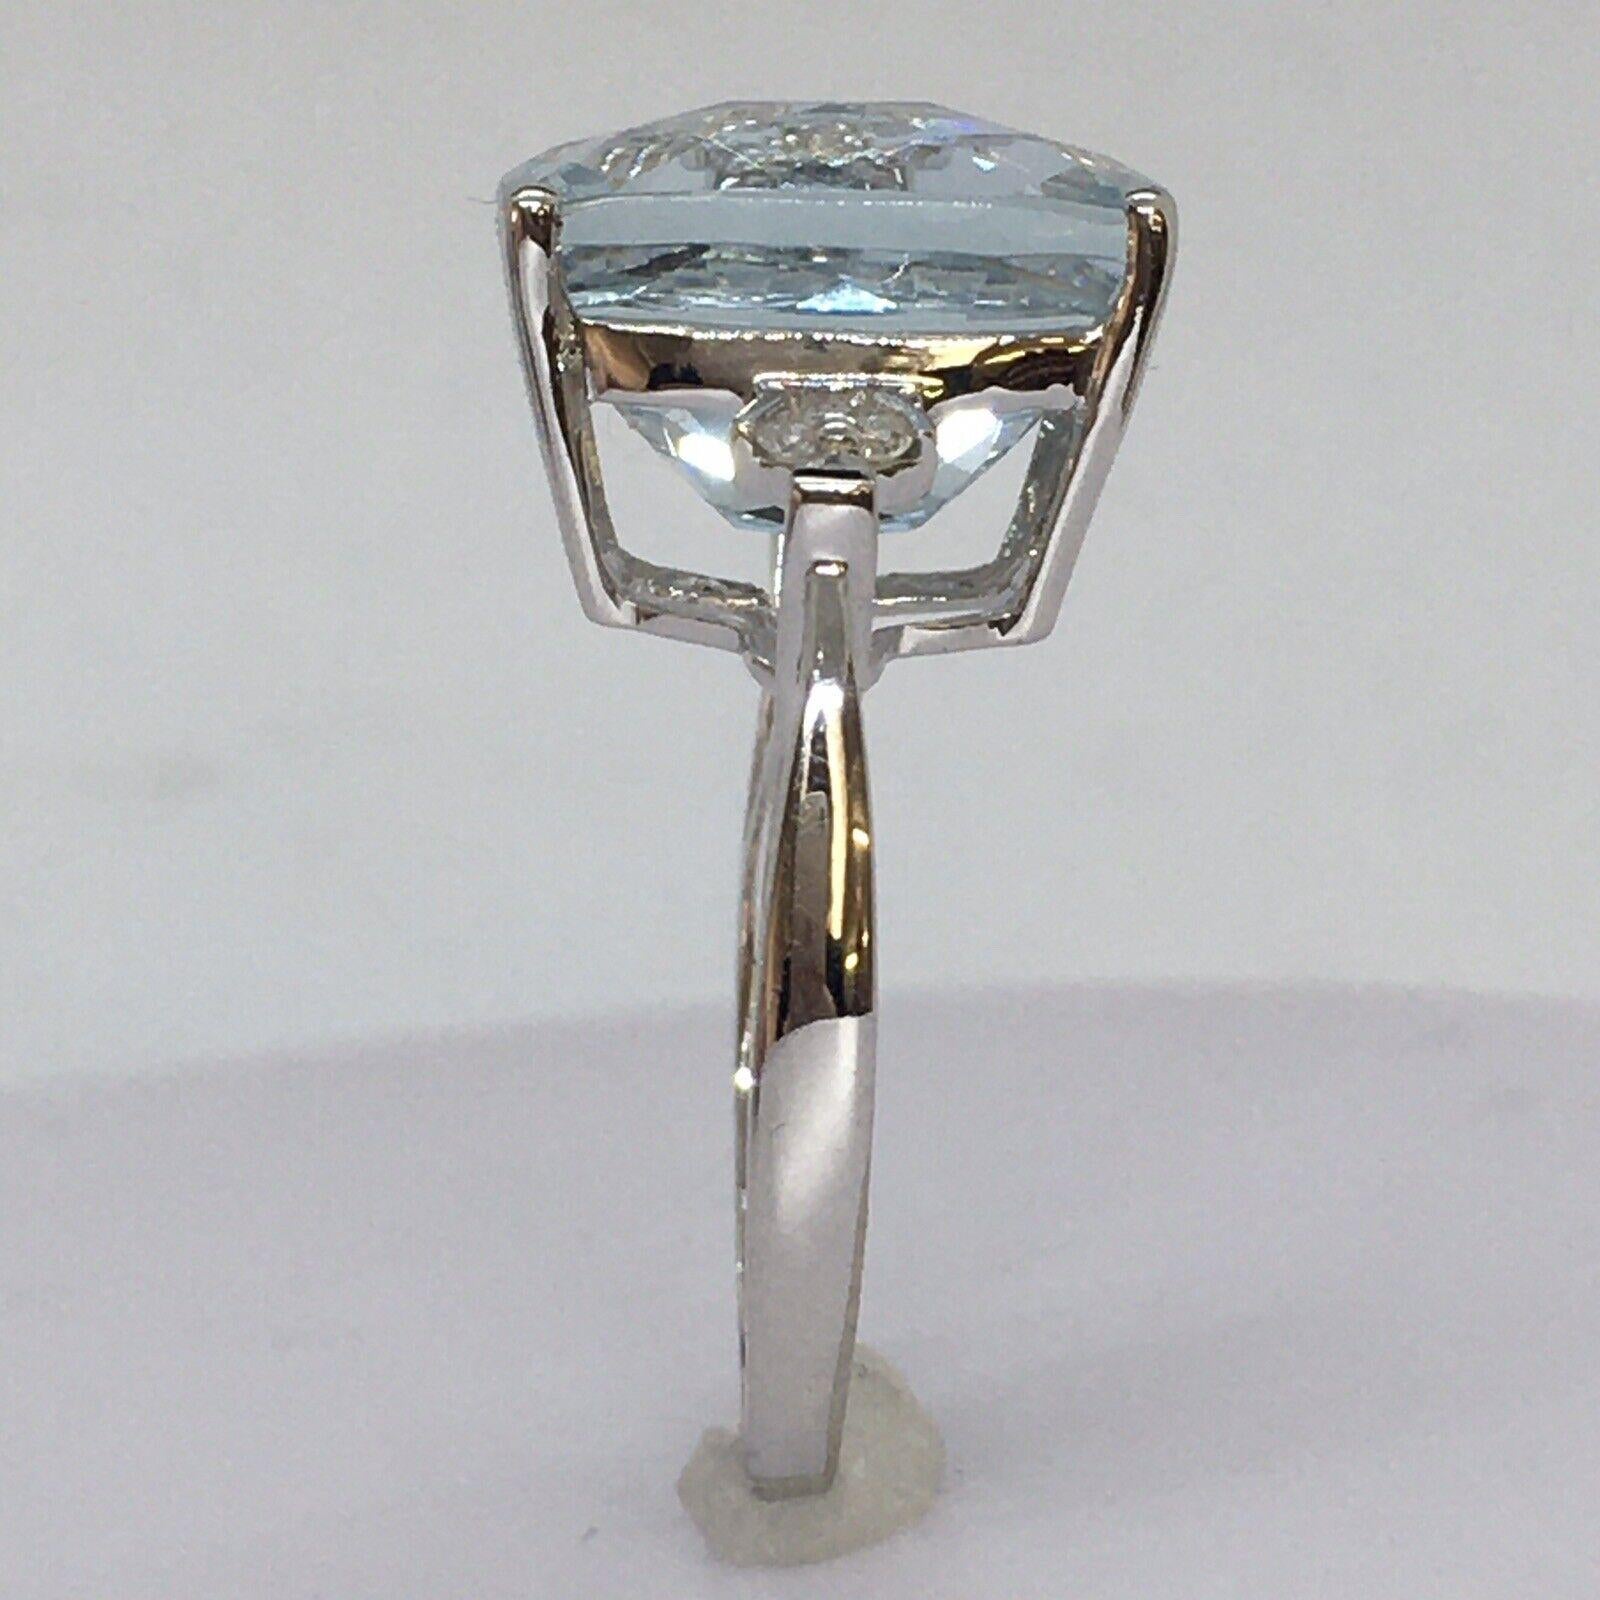 
14k White Gold 8.5 Carat Natural Aquamarine Diamond Statement Ring Size 8.5


Size 8.5
 Aquamarine Rectangular Checker Cut Cushion measures 13.8 mm by 11.9 mm by 9.1 mm, calculated to be 8.80 Carat by measurements 
6 Diamonds, 0.01 Carat each, 0.06